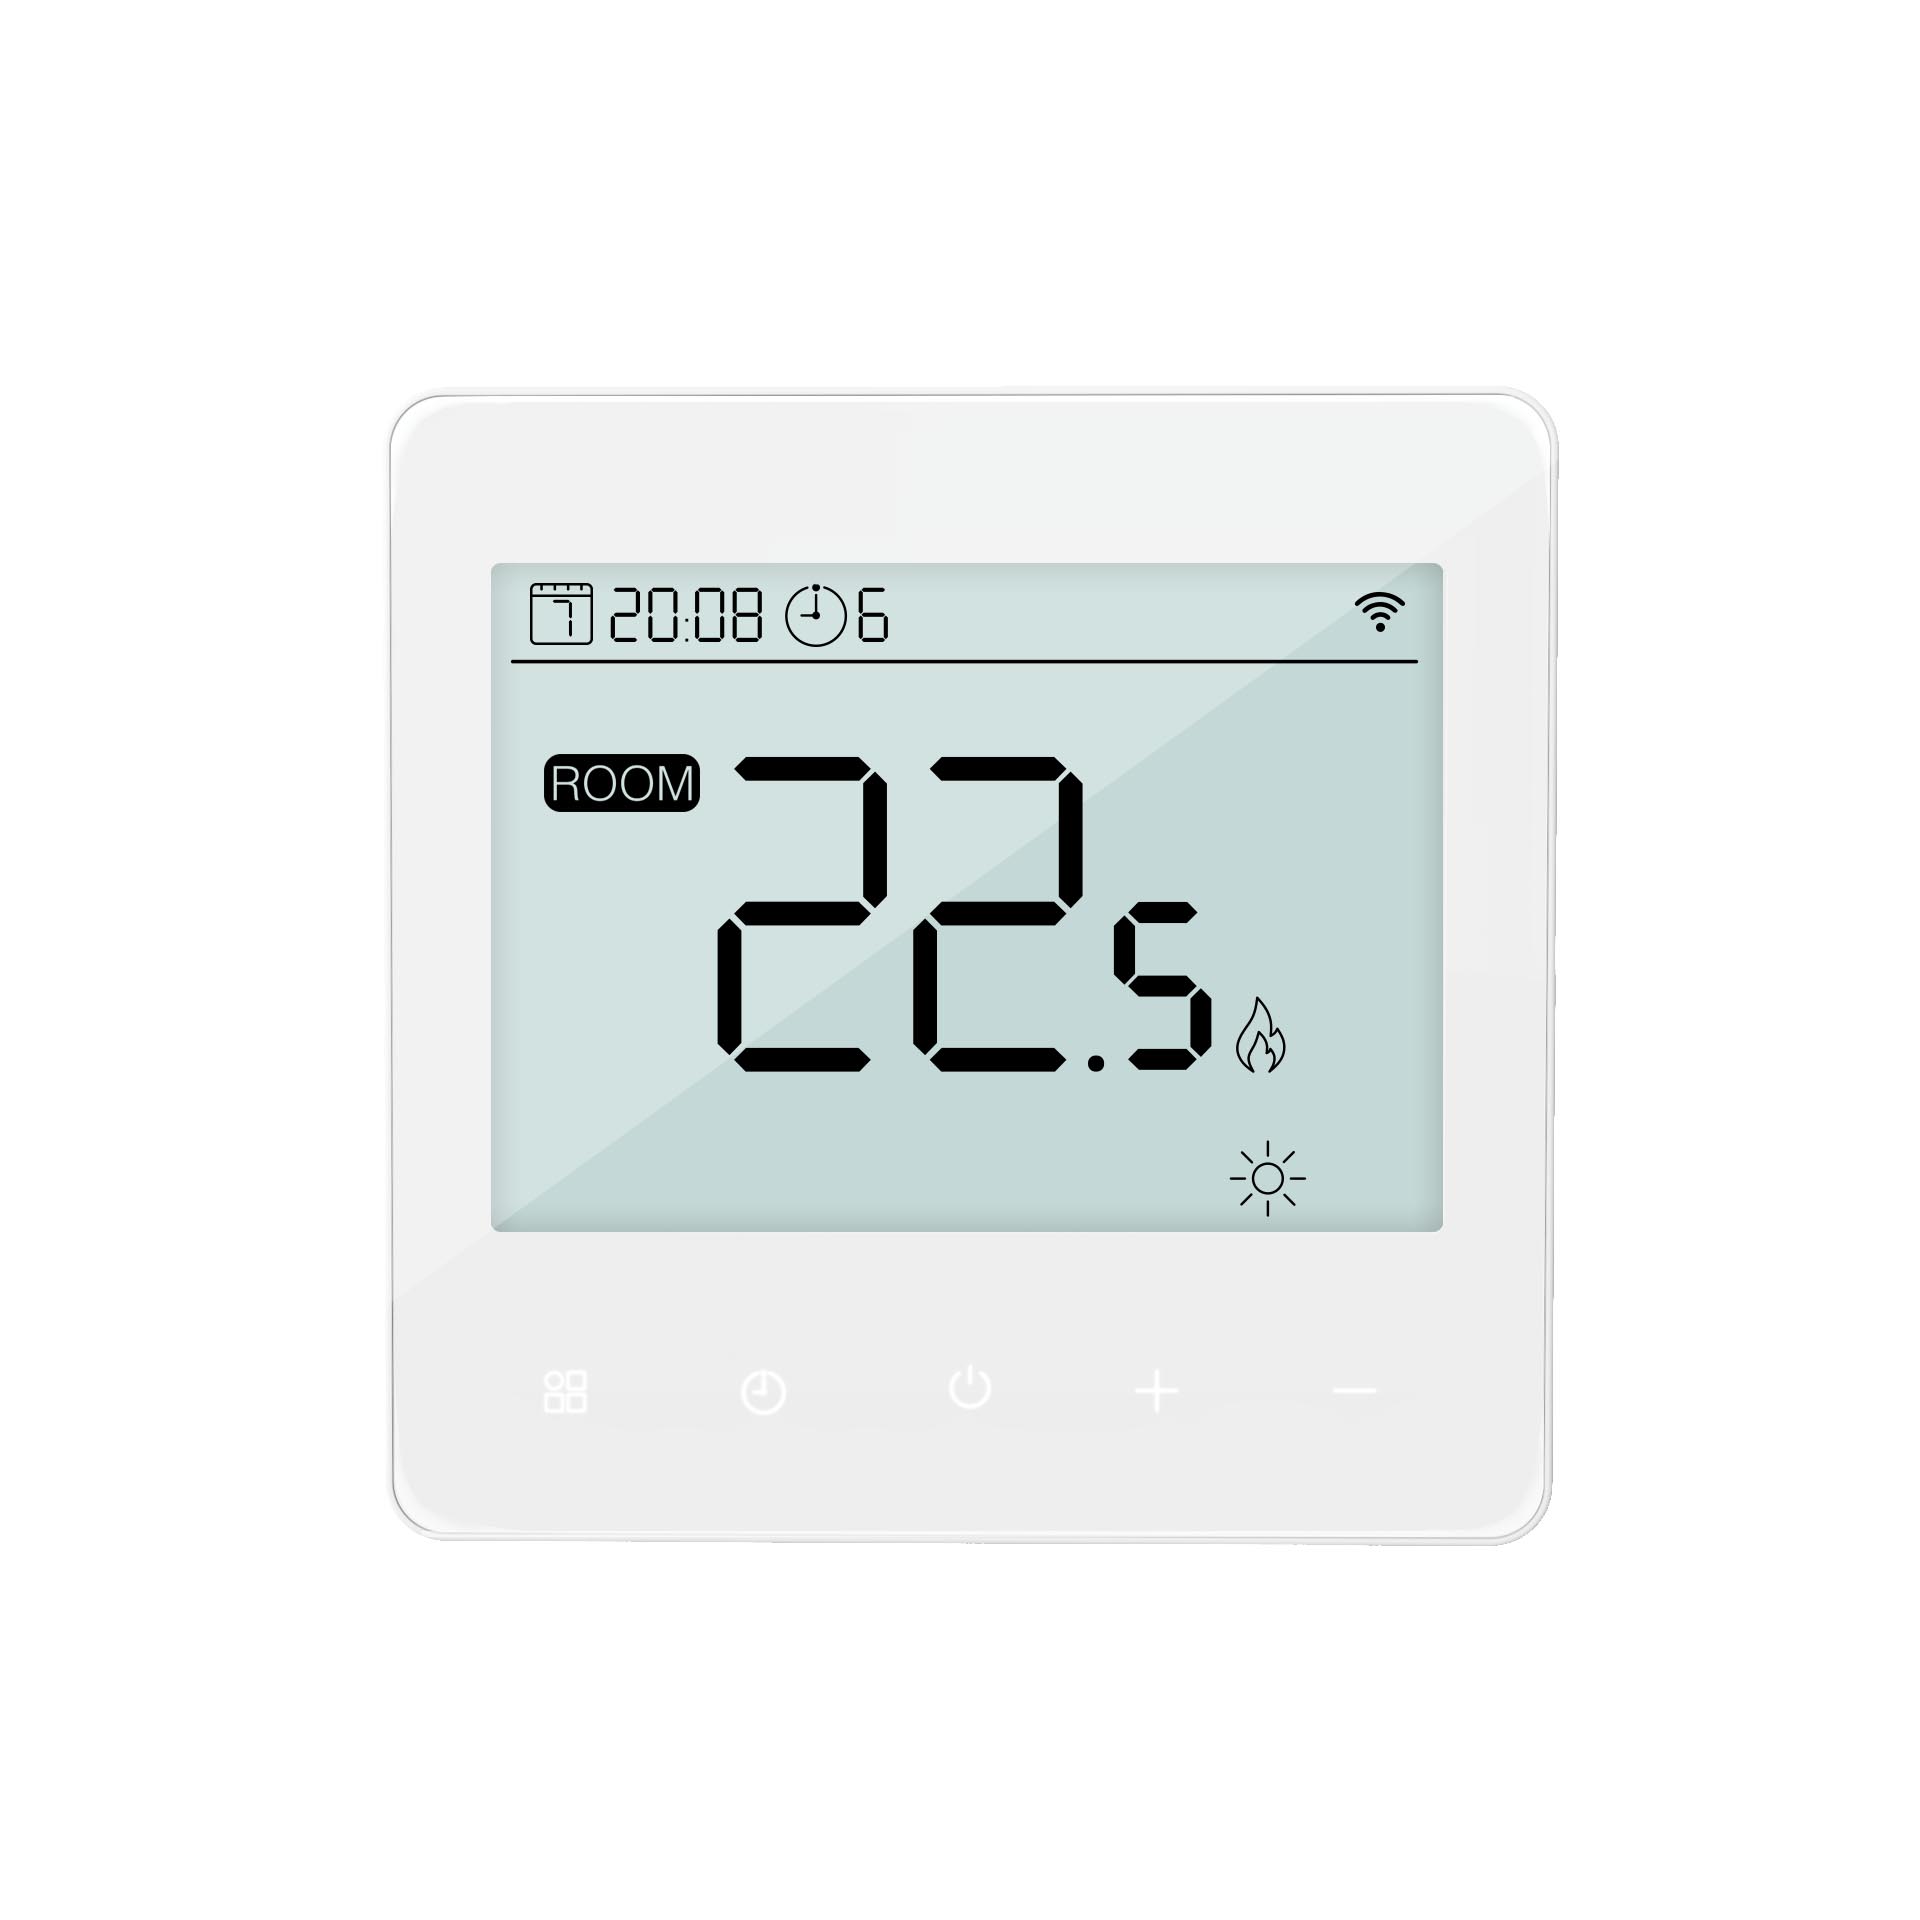 3-Speed Fan Coil Control Paired with Floor Heating Thermostat